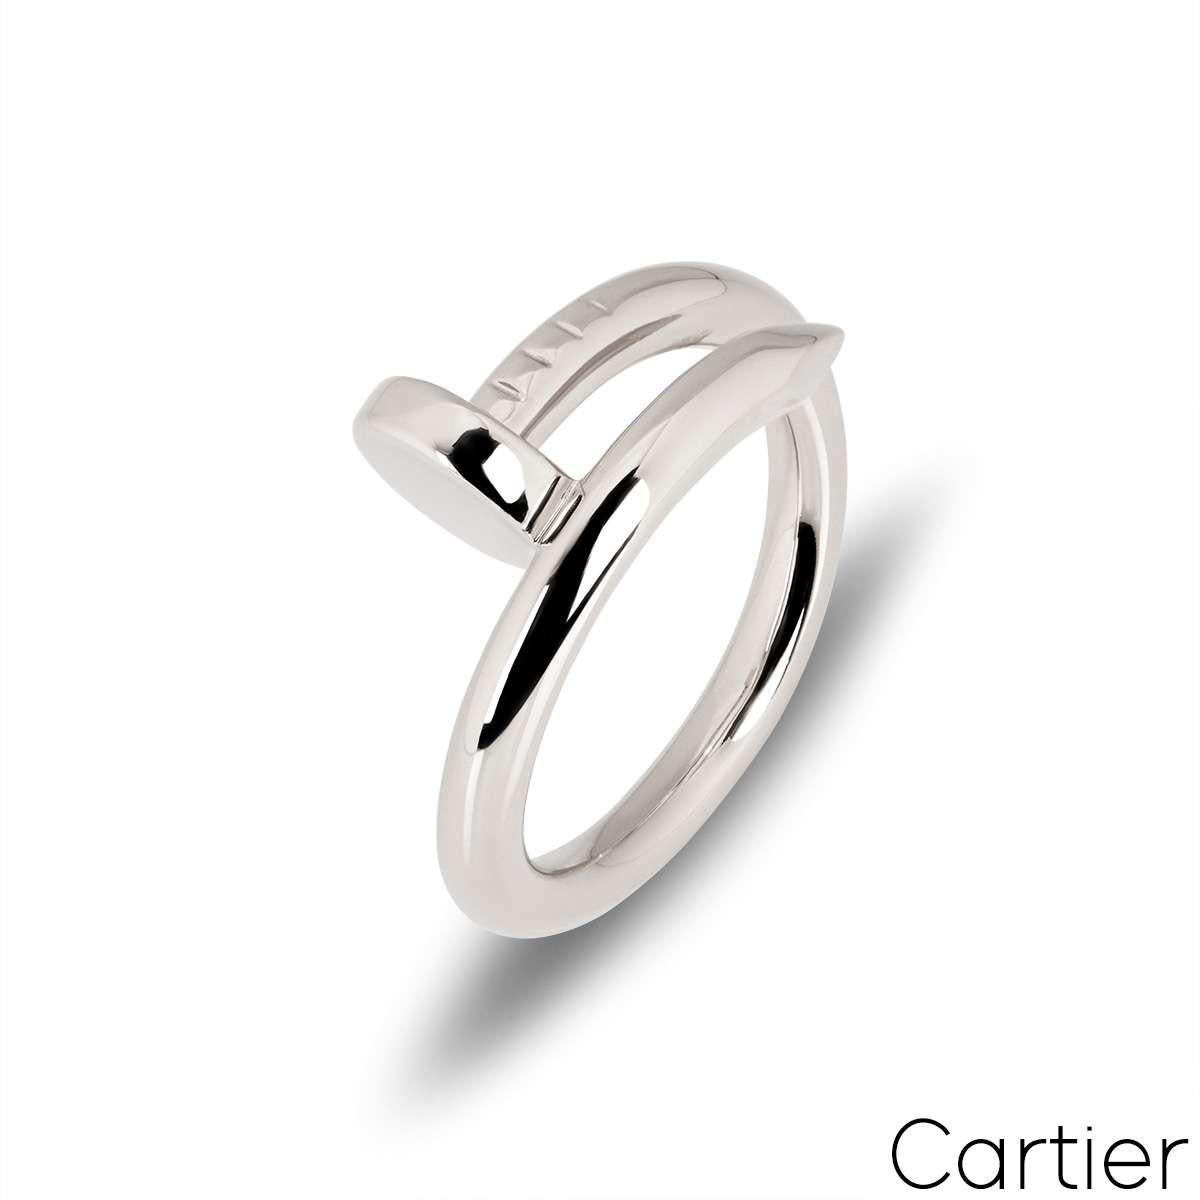 A signature 18k white gold Juste un Clou ring from Cartier. The ring is wrapped around with a nail head at one tip and a nail end at the other. A size UK Q - EU 57, this ring has a gross weight of 8.41 grams.

Comes complete with a RichDiamonds